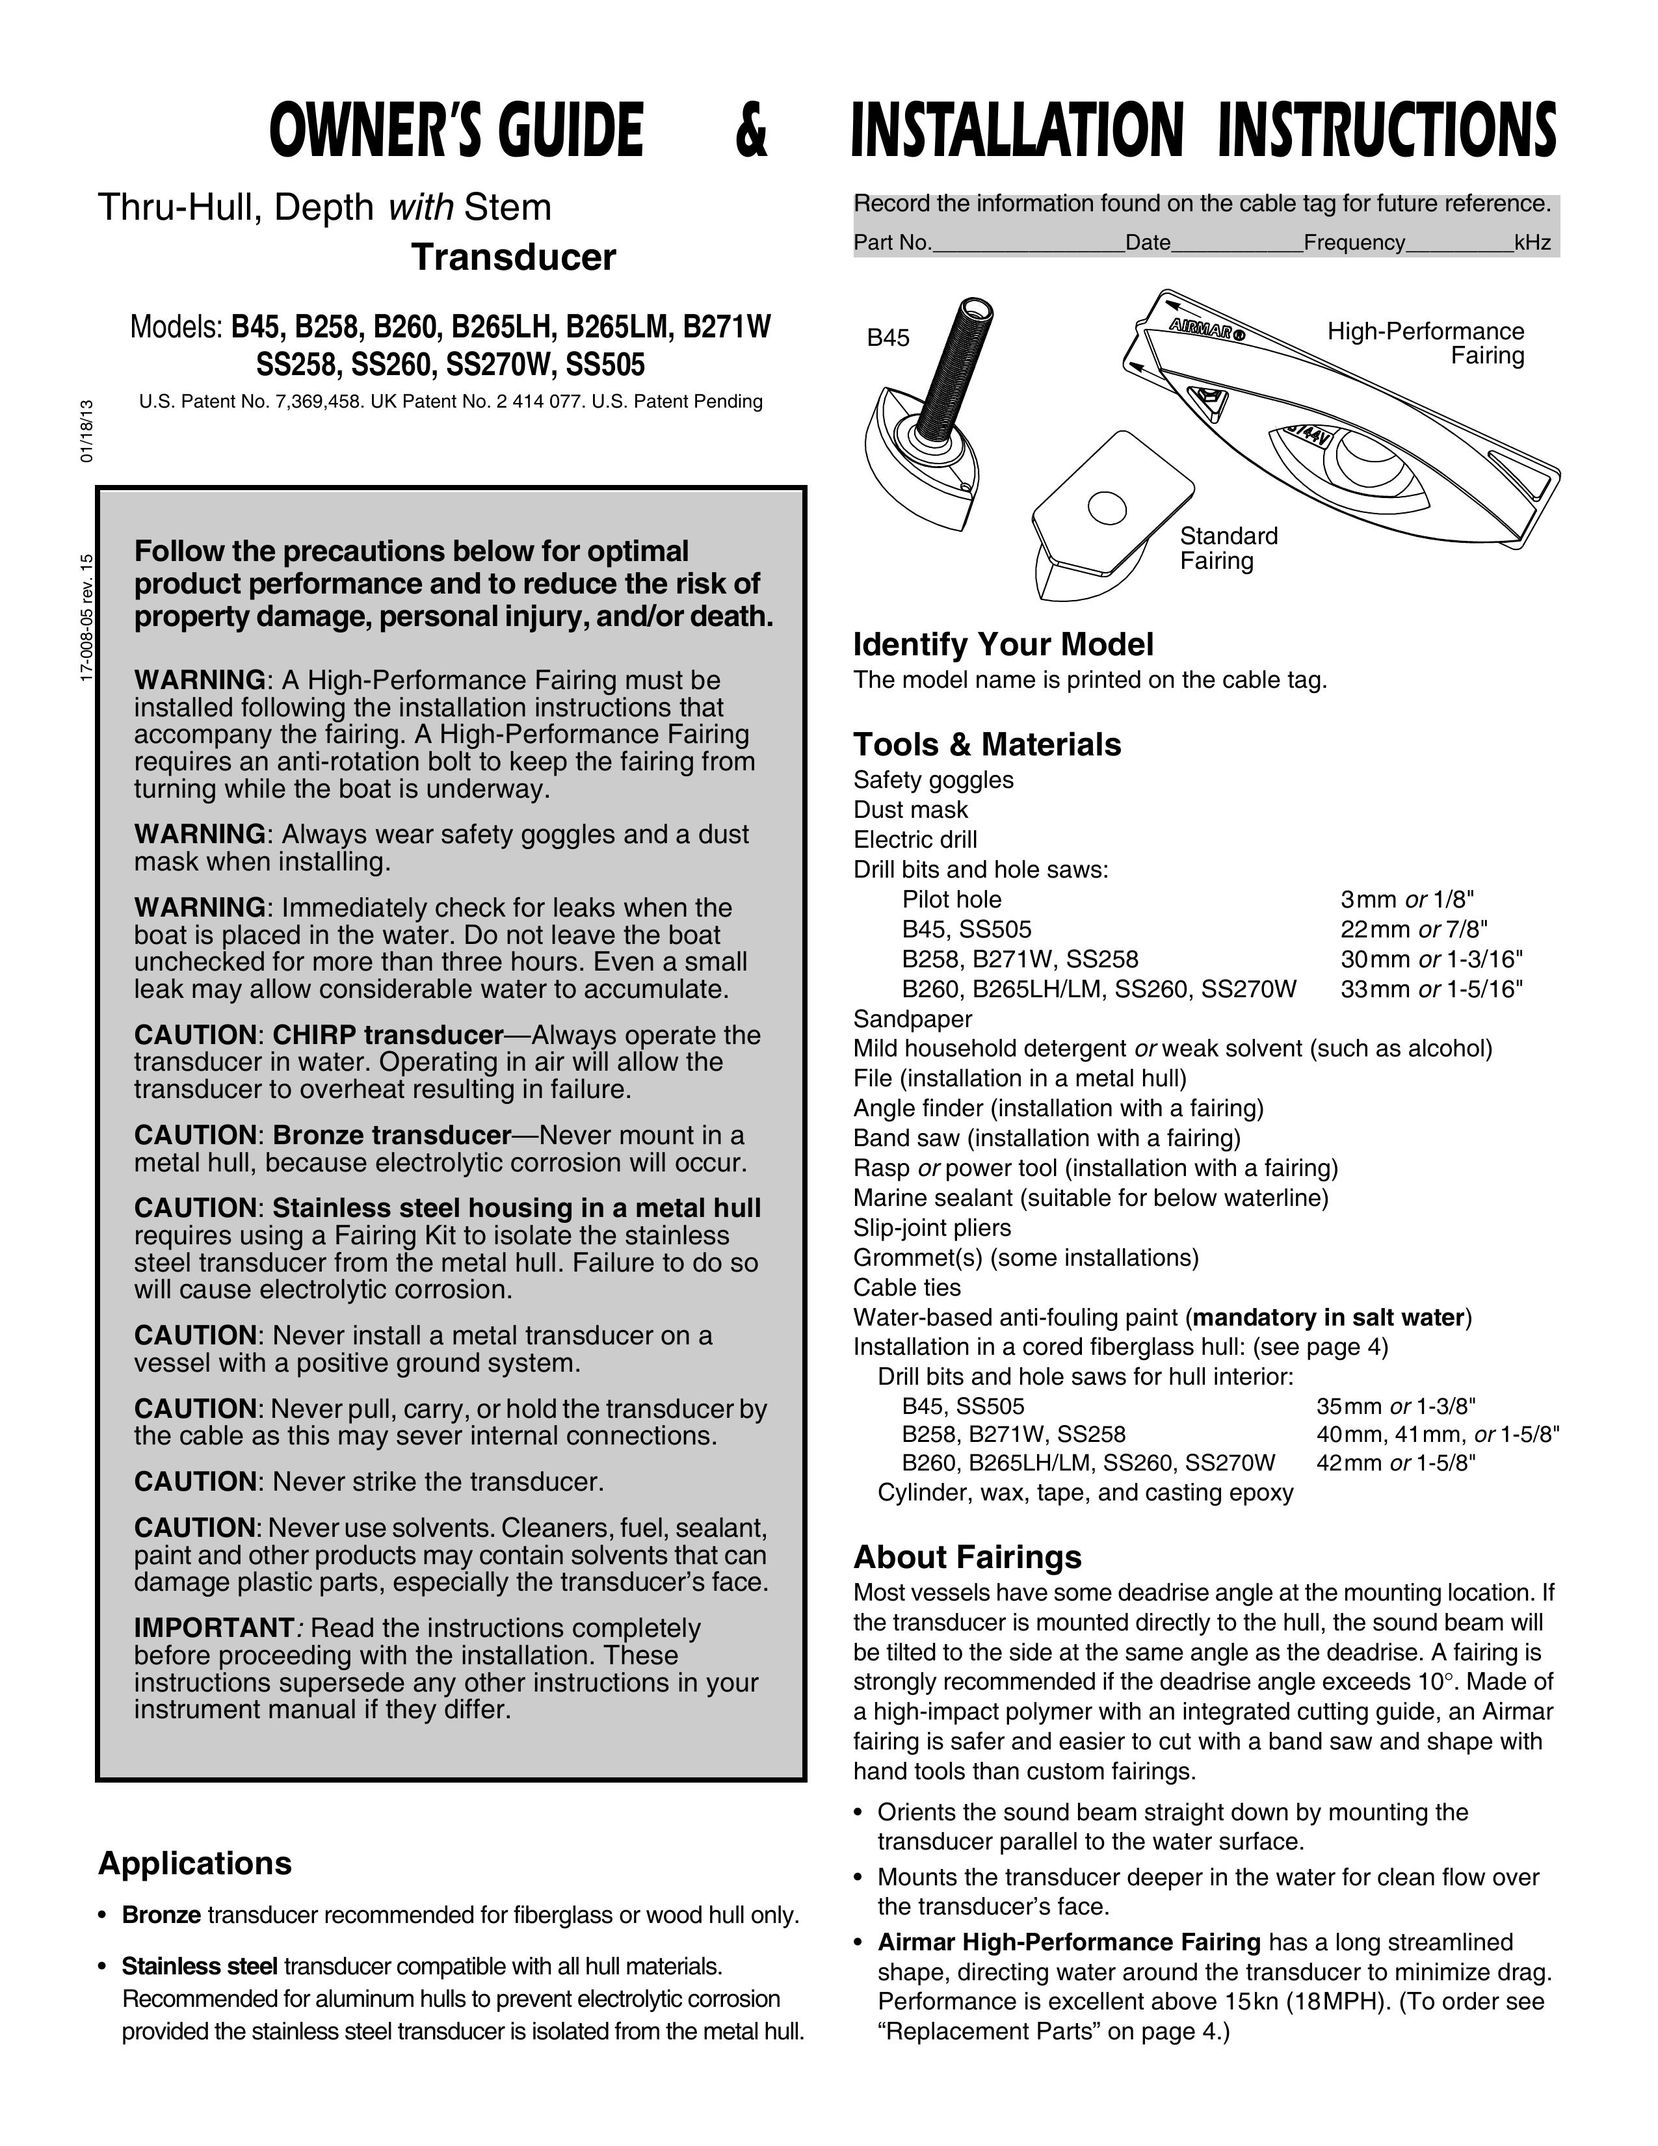 New Transducers B265LM Network Router User Manual